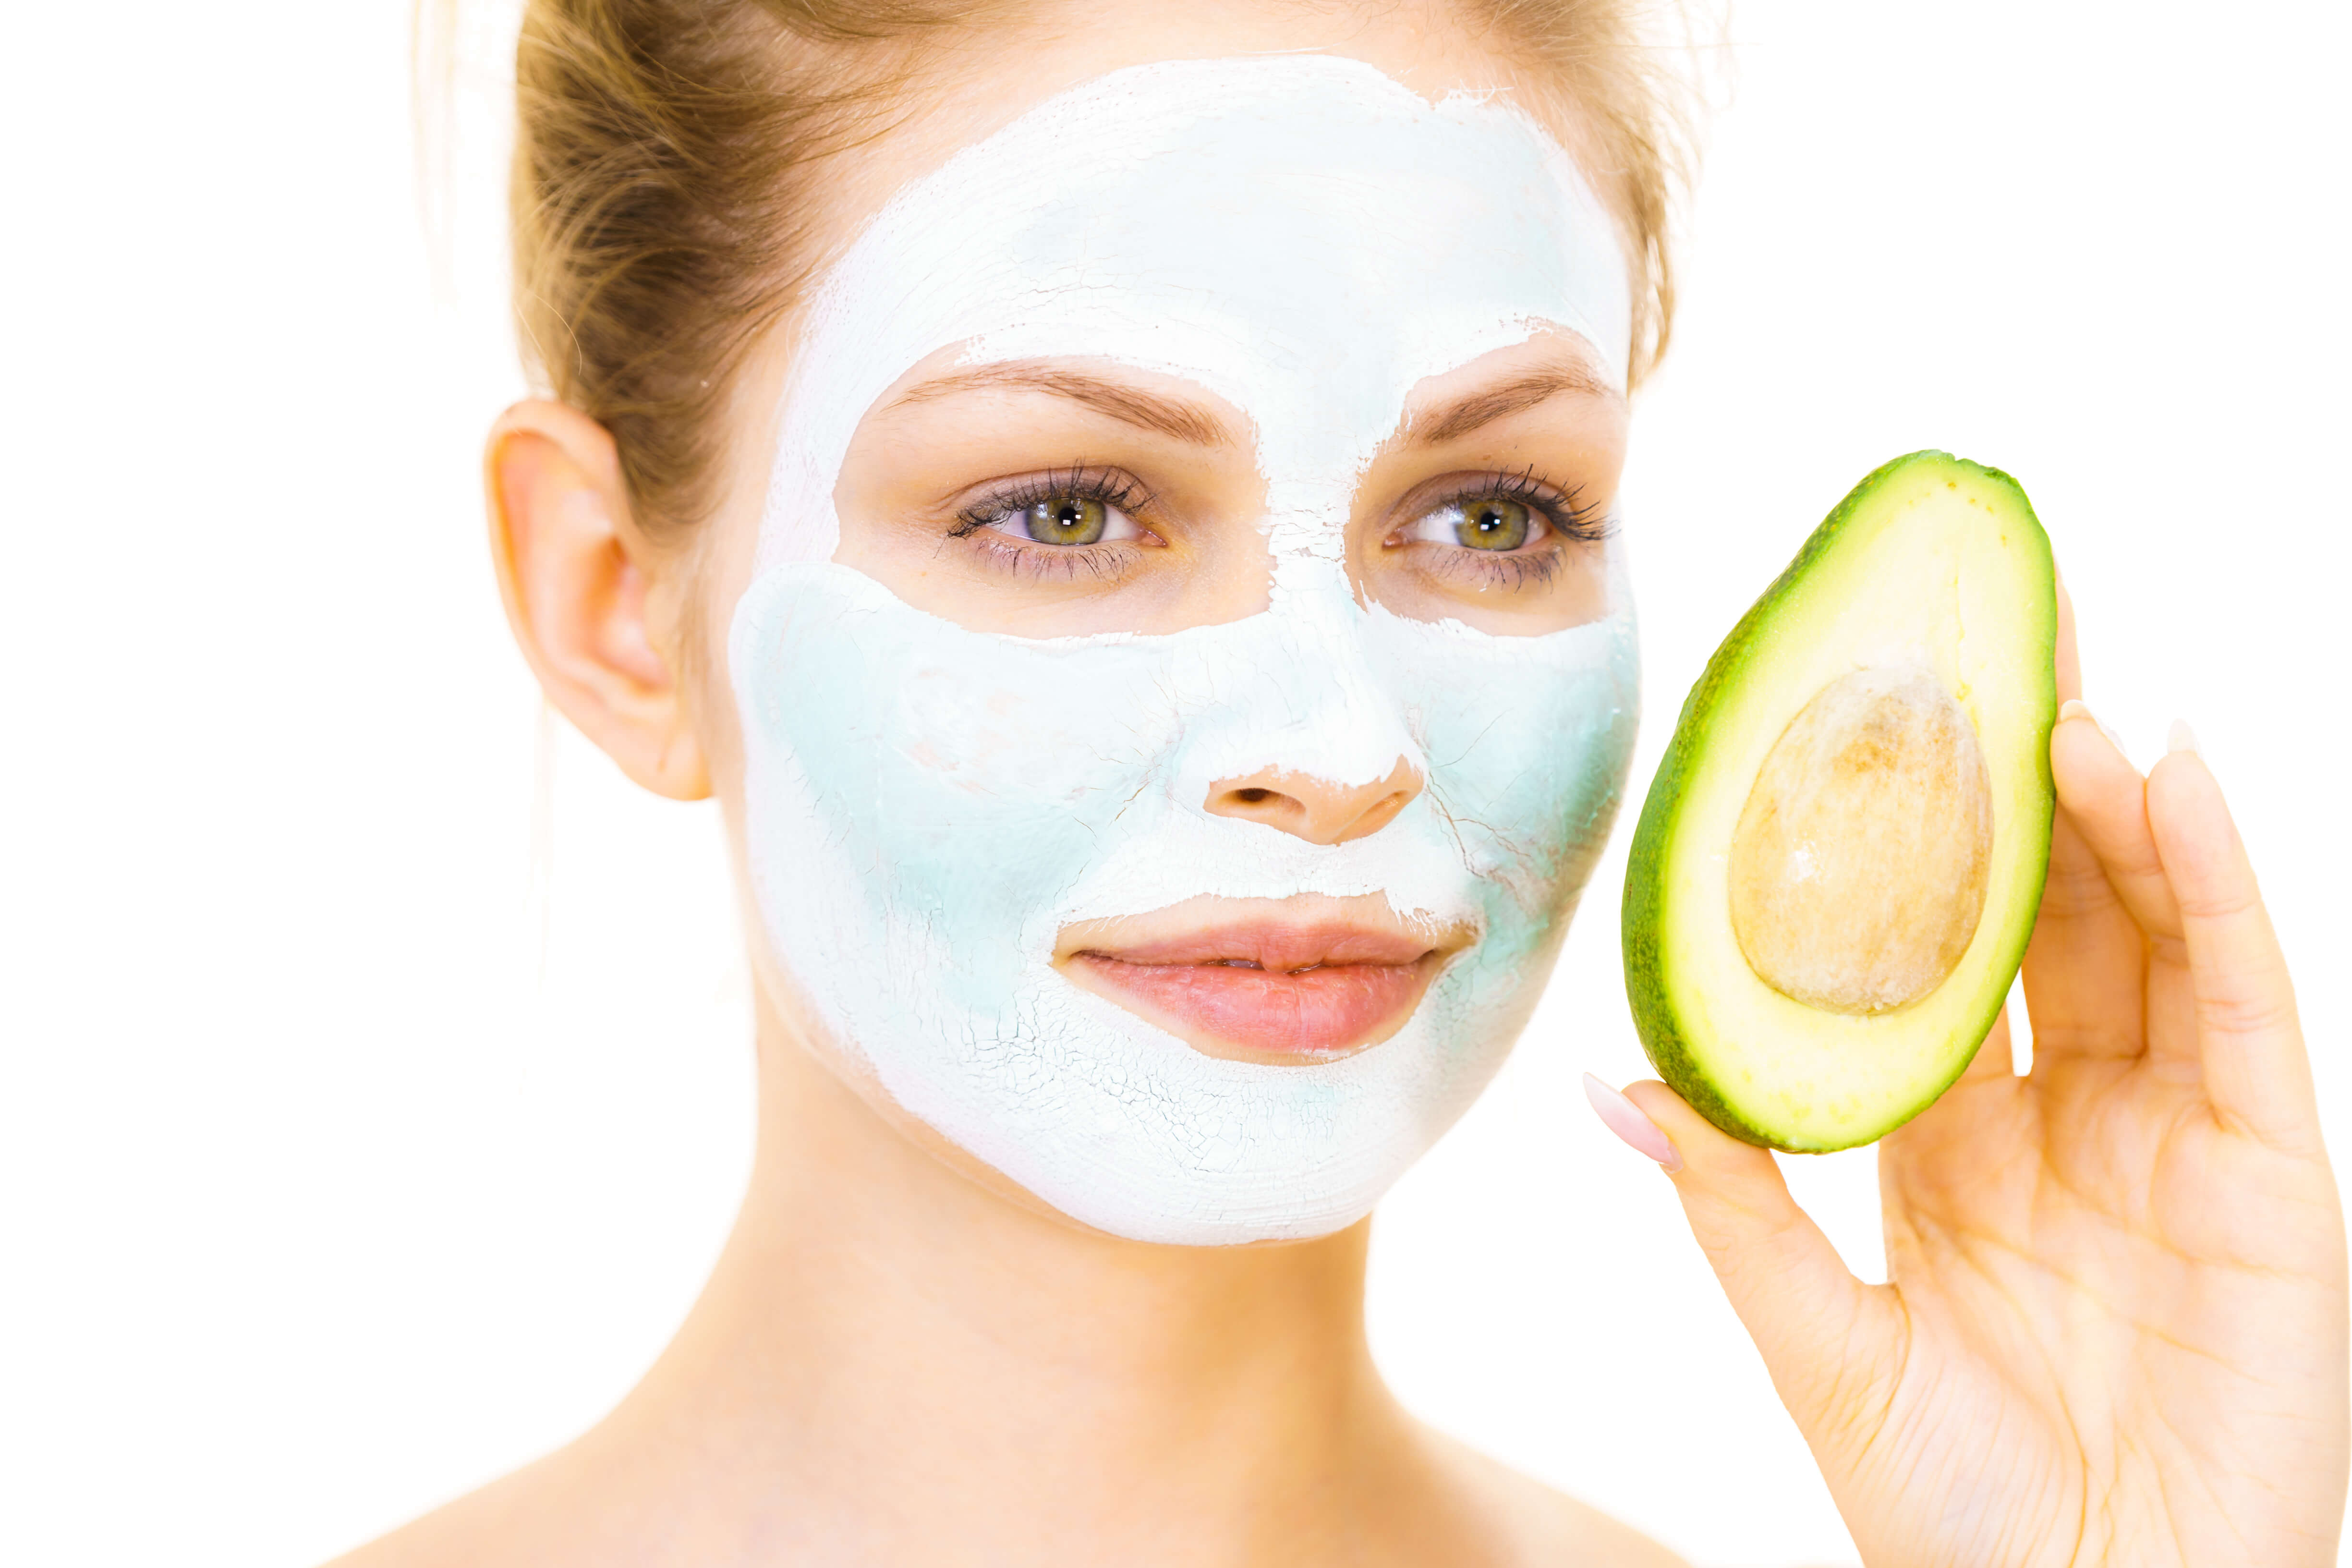 Avocado and Avocado Oil benefits for Skin and Hair